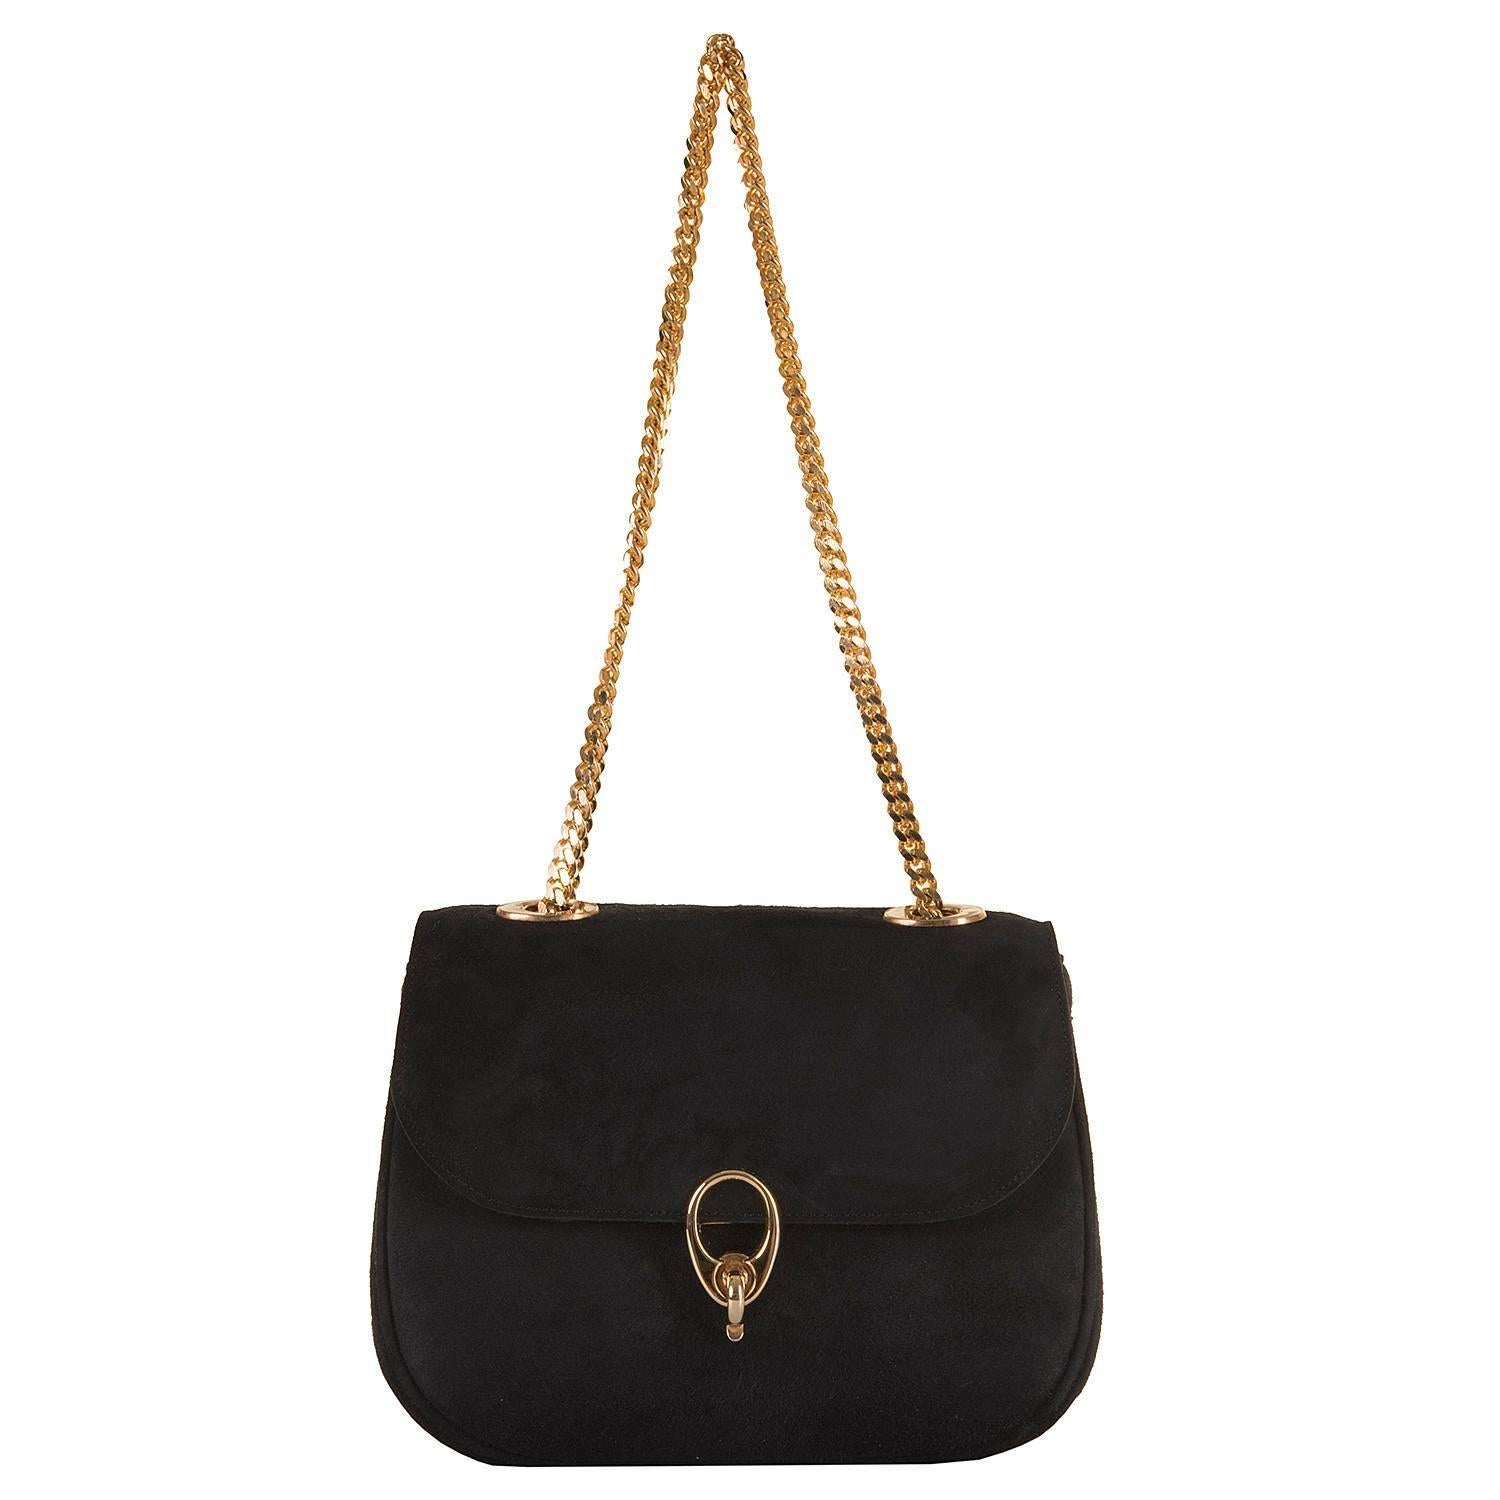 This classic beautiful vintage shoulder bag by Celine of Paris, is finished in black calf-suede with gold-tone hardware. Of superb quality, the double chain-link handles are complemented by Celine's iconic latch-clasp. In superb condition, inside